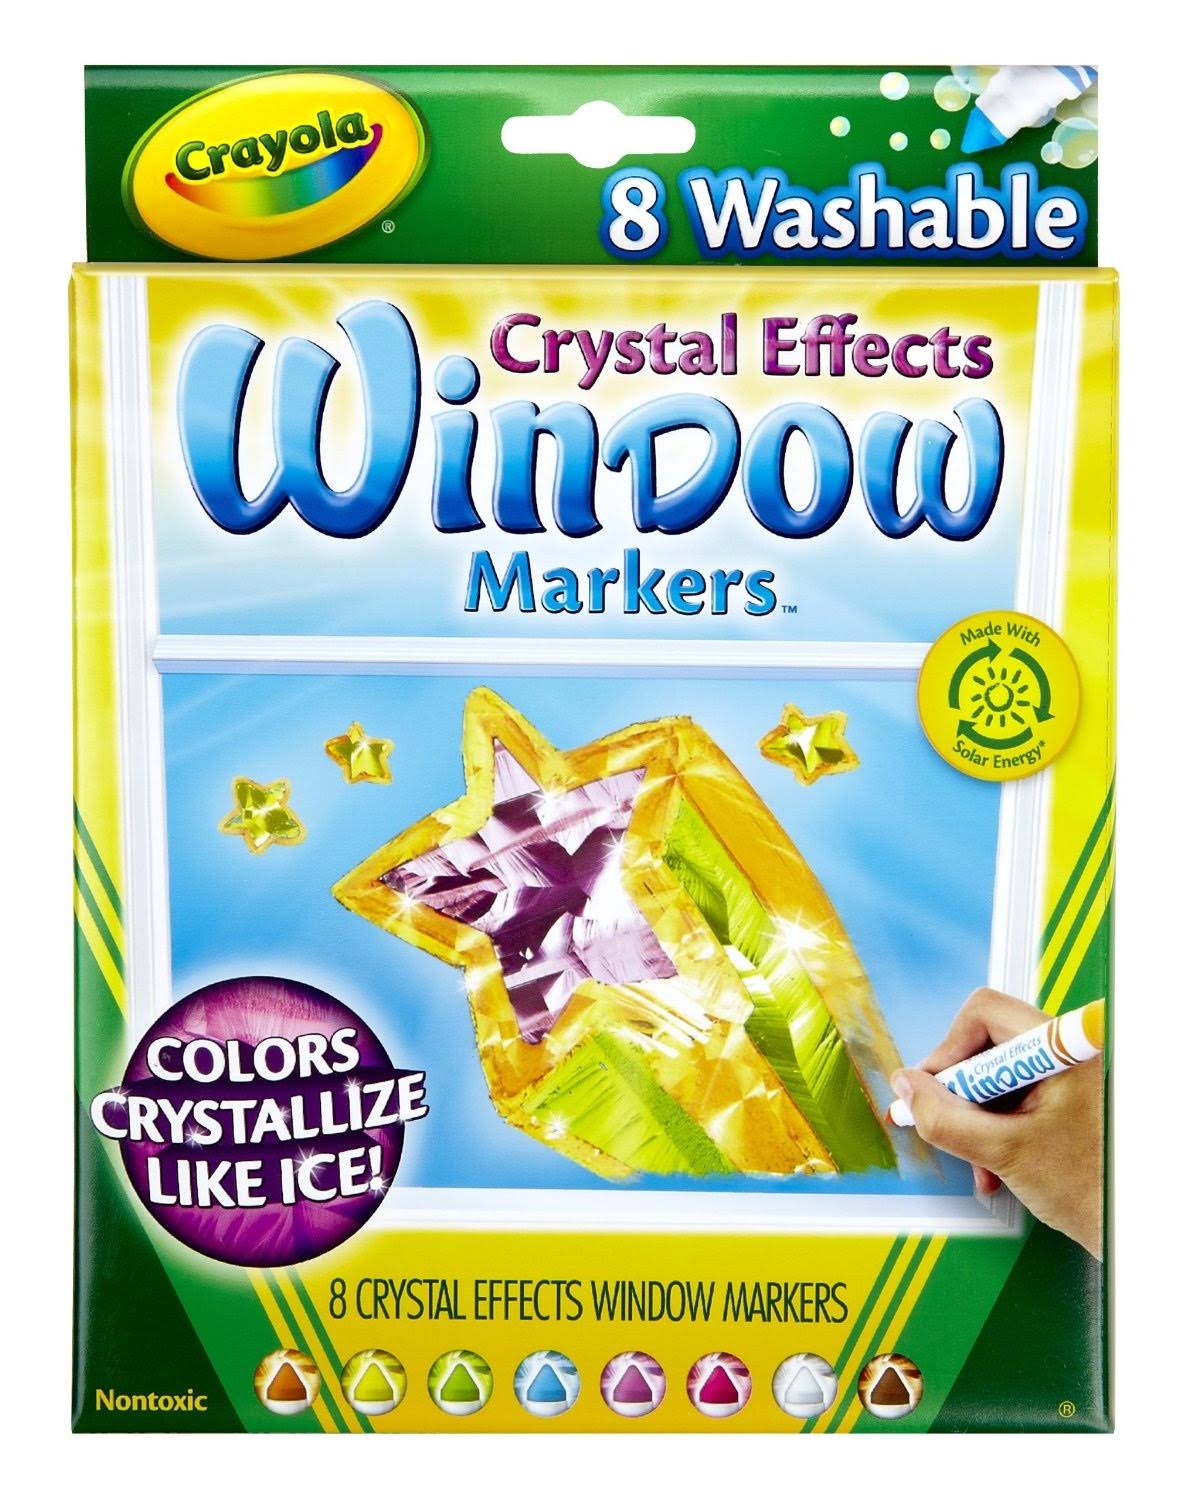 Crayola Crystal Effects Window Markers - 8 Colors